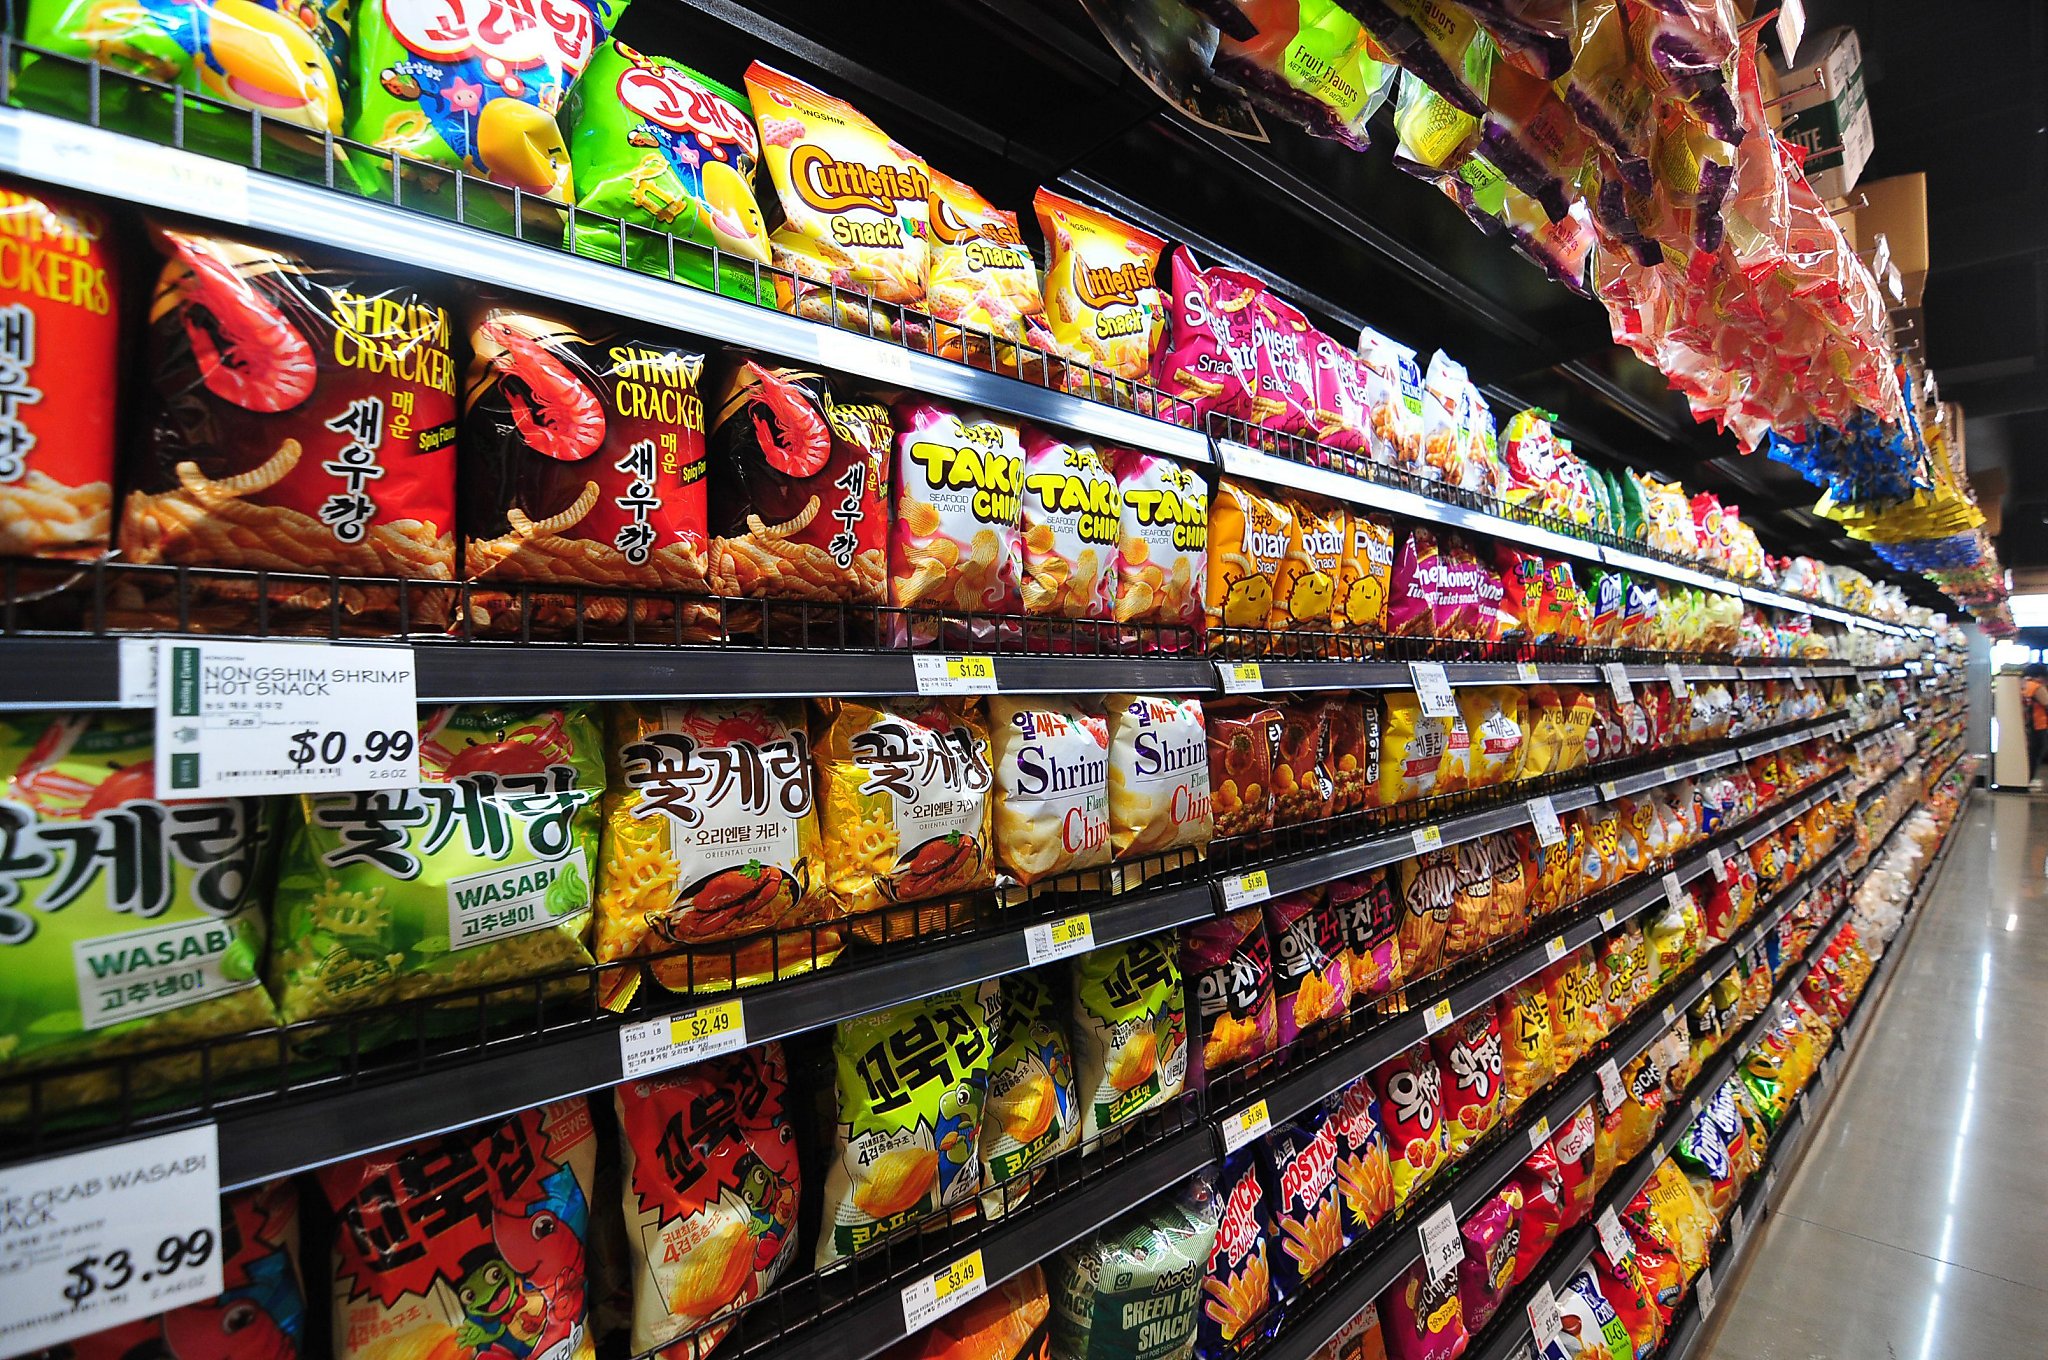 H Mart is a snack food paradise. Our critic lists what to buy at the S